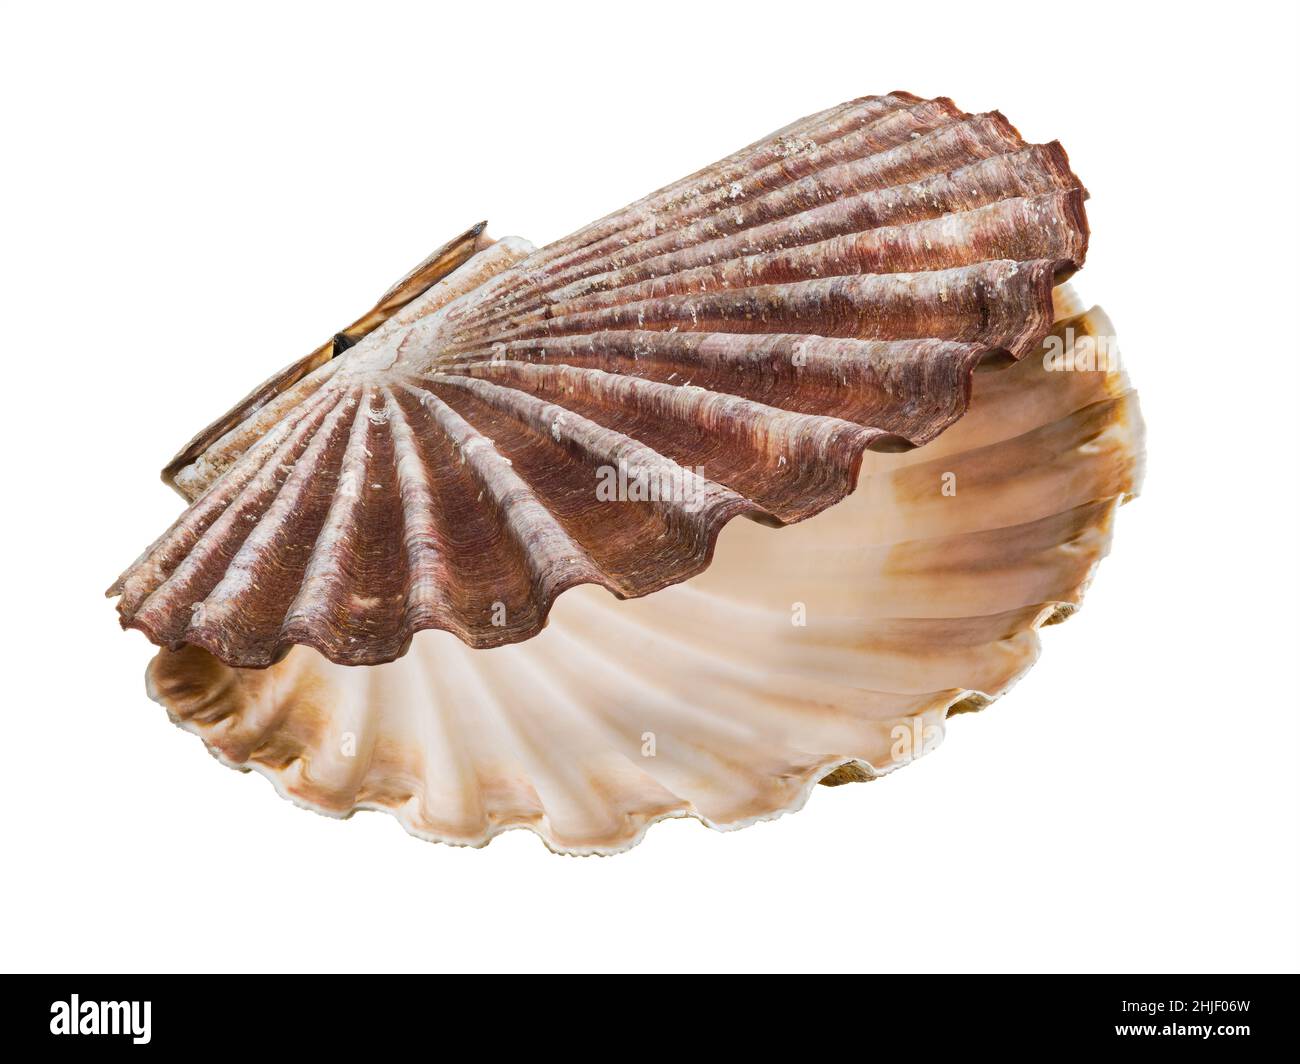 Open fan shaped shell of great scallop shellfish isolated on a white background. Closeup of beautiful empty seashell of edible marine bivalve mollusk. Stock Photo